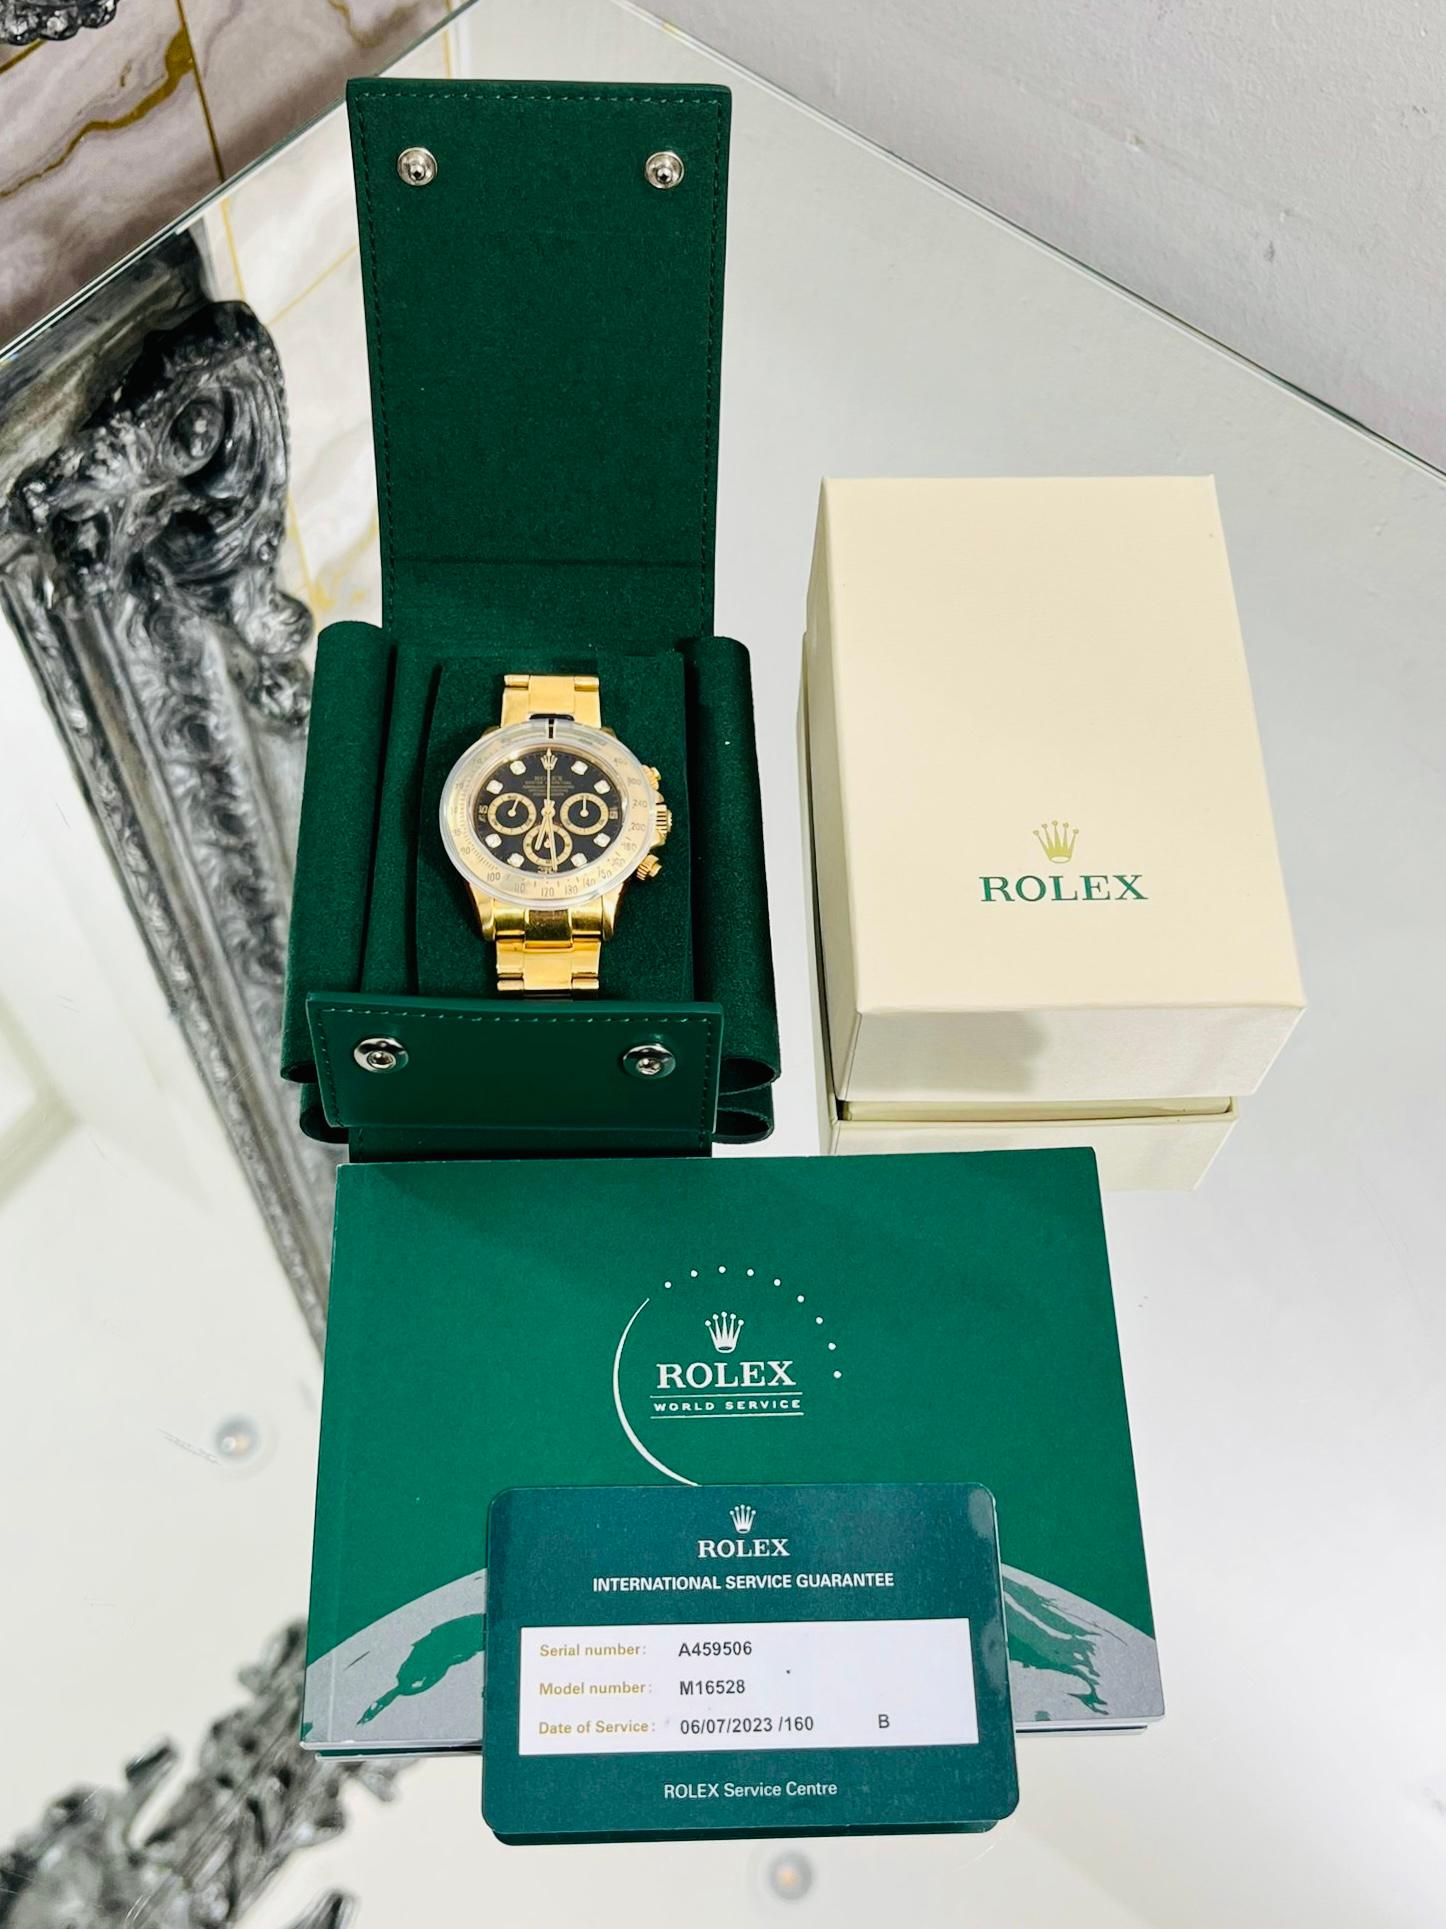 Rolex Daytona 18k Gold Diamond Dot Dial

1999 Model - Solid 18k Yellow gold Dayotna watch with chronograph black face and diamond dot dial. Solid gold bracelet with folding clasp closure Sapphire crystal face and automatic movement.

This watch has